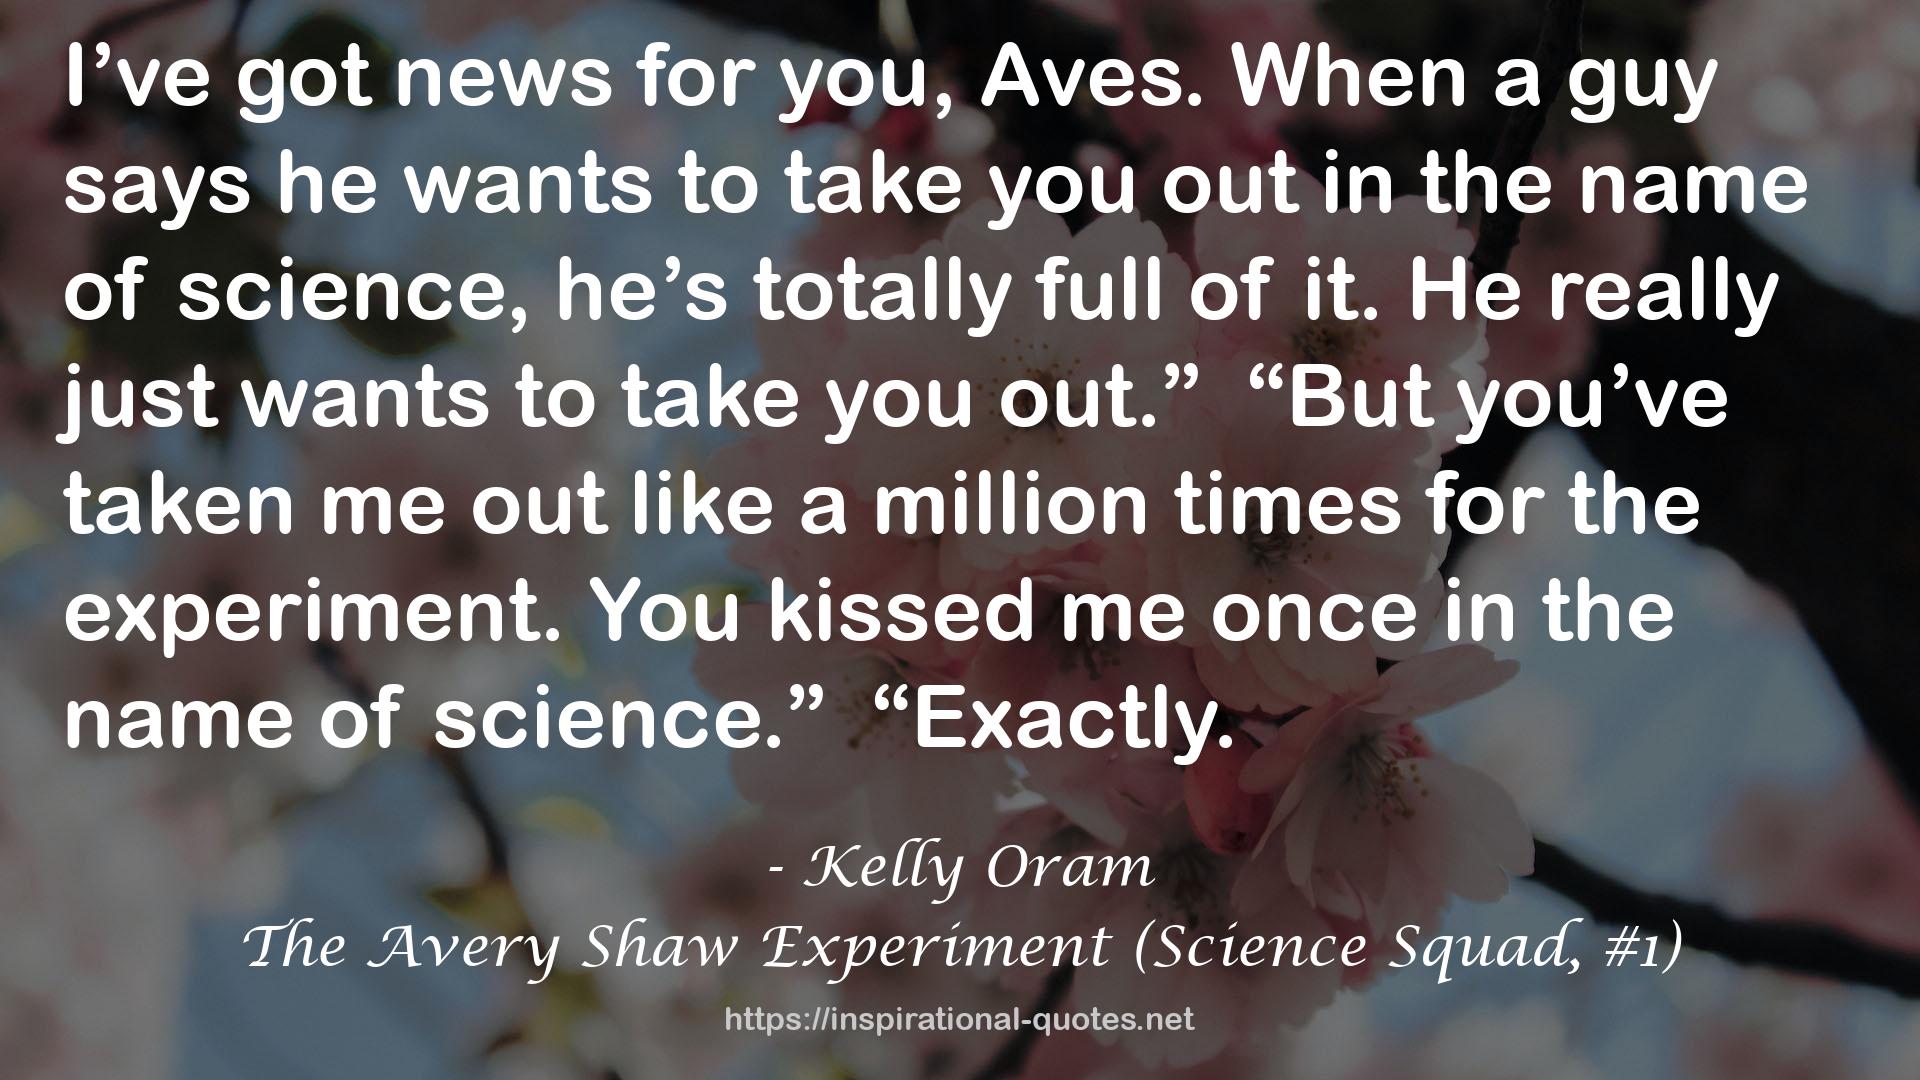 The Avery Shaw Experiment (Science Squad, #1) QUOTES